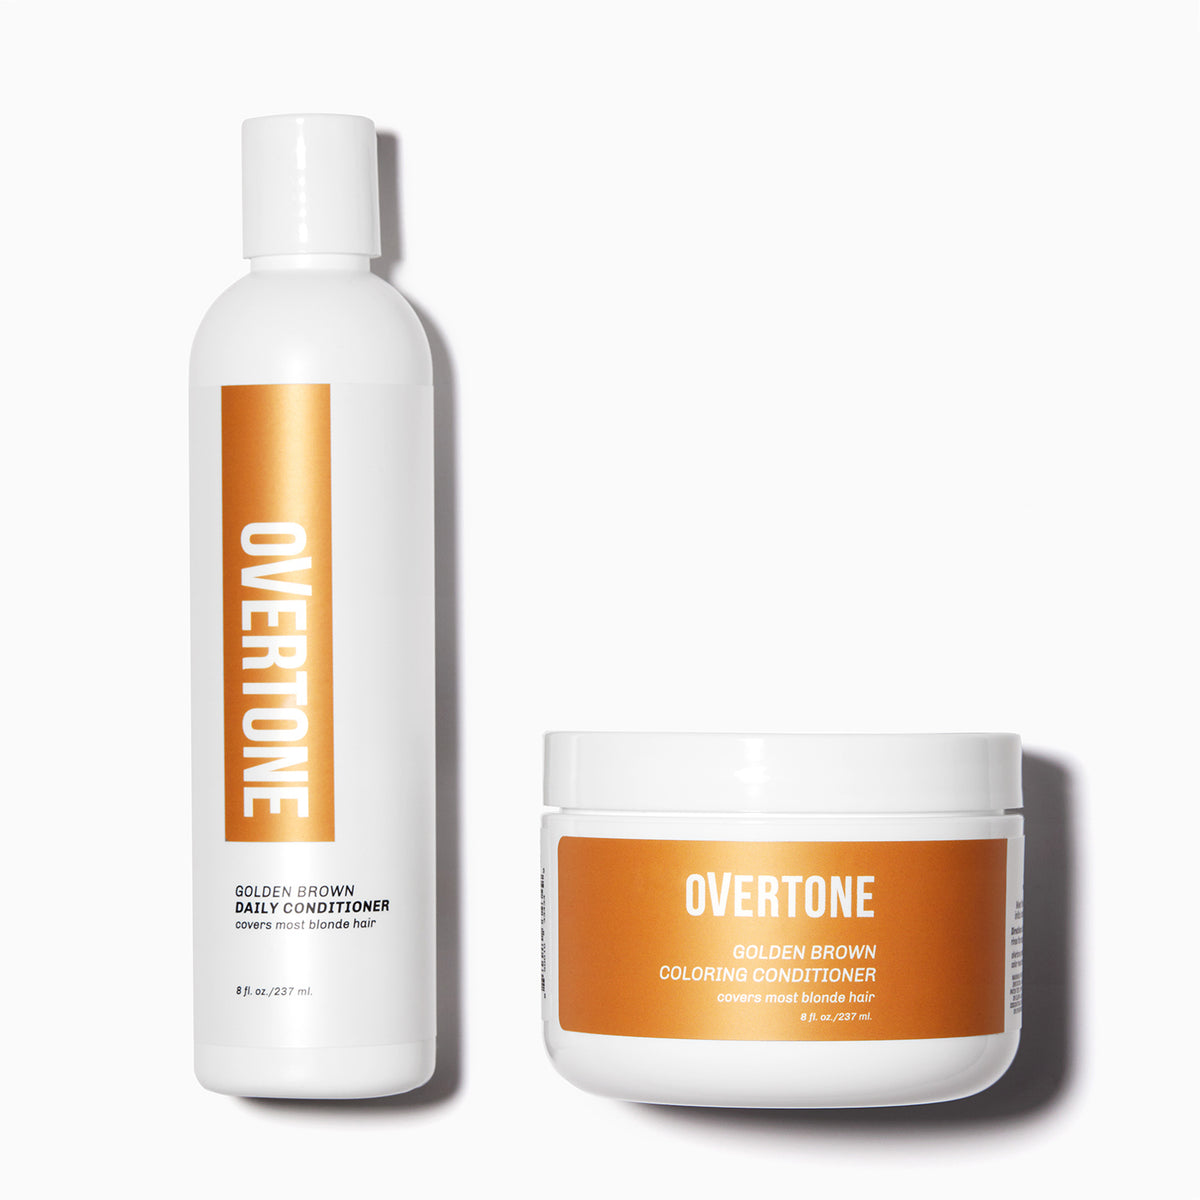 oVertone Golden Brown Coloring Conditioner and Daily Conditioner